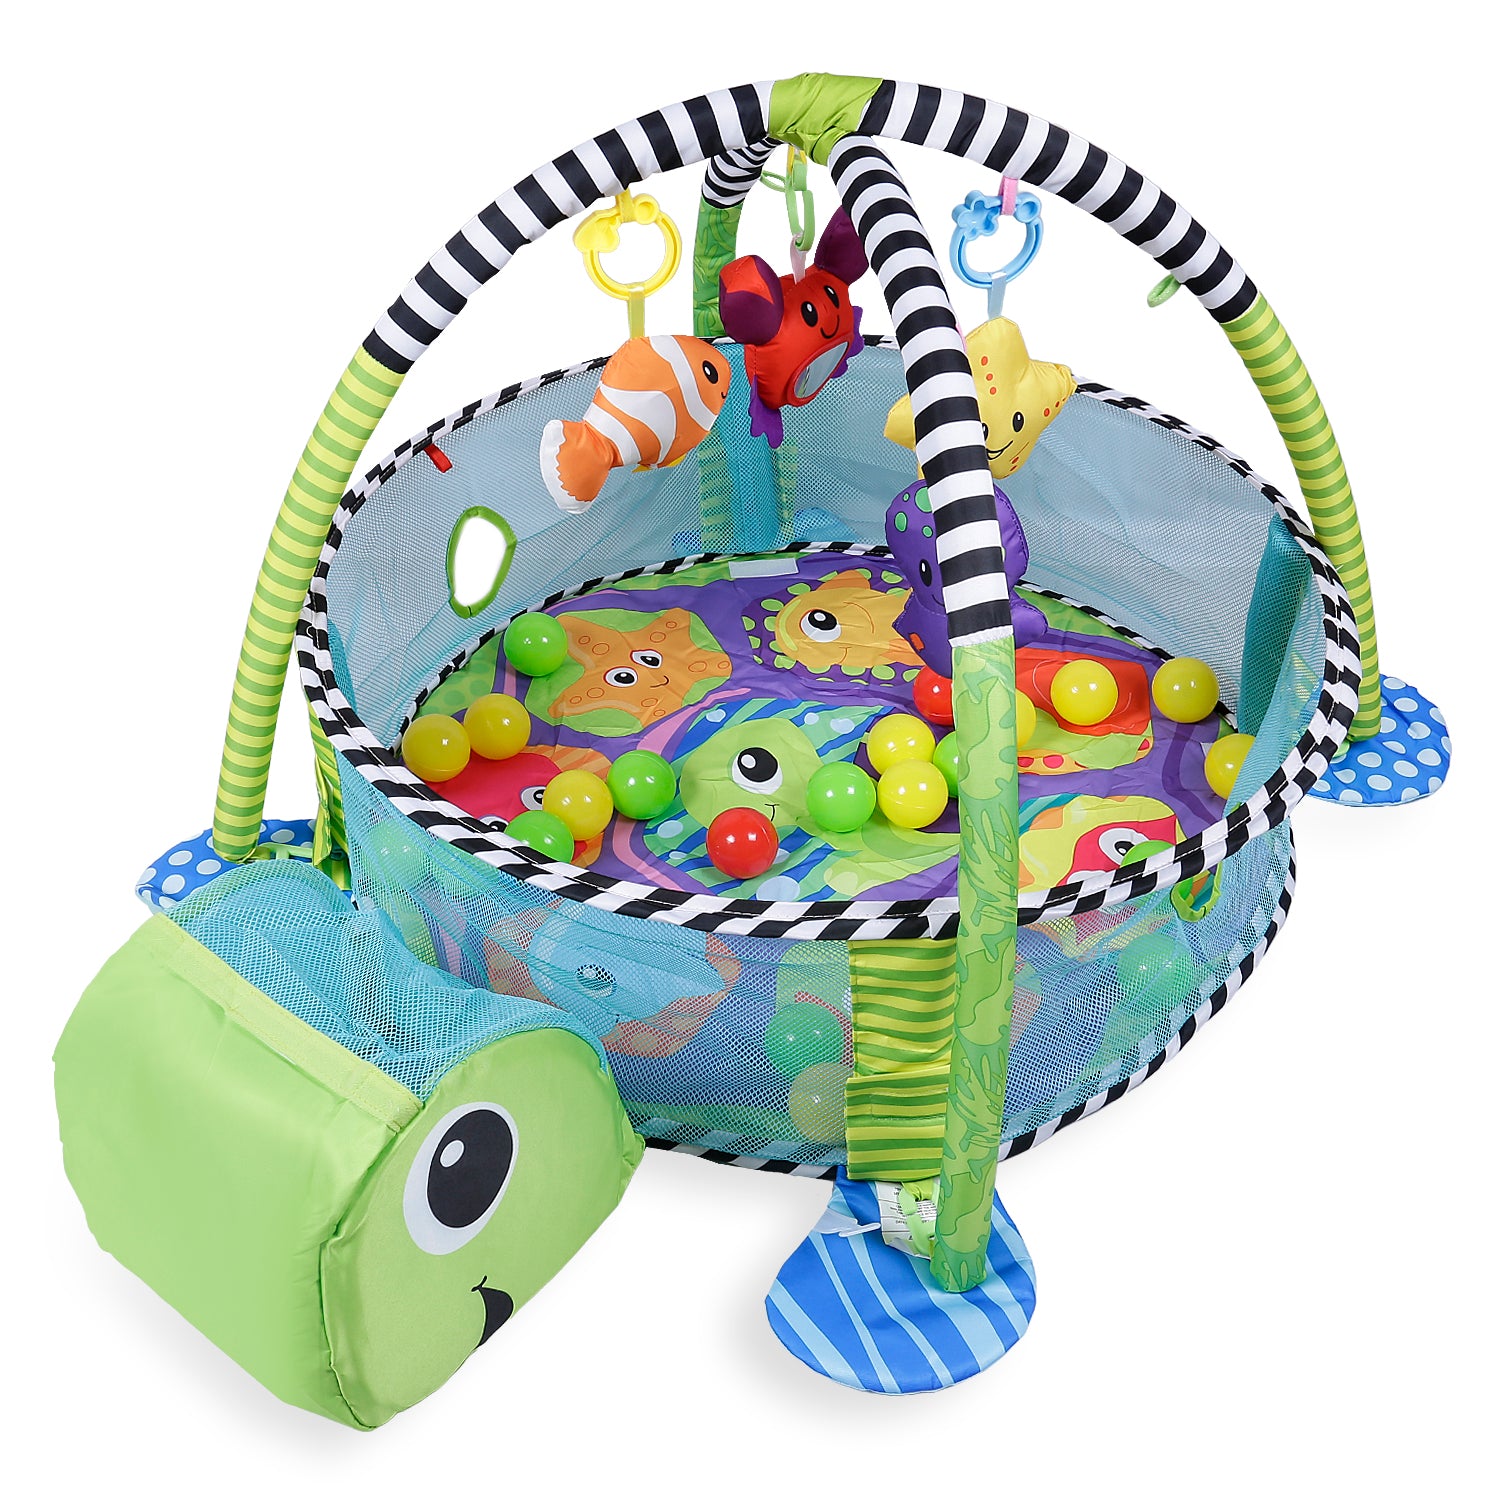 Baby Moo Turtle Infant Play Mat Activity Gym With Hanging Toys And Balls - Green